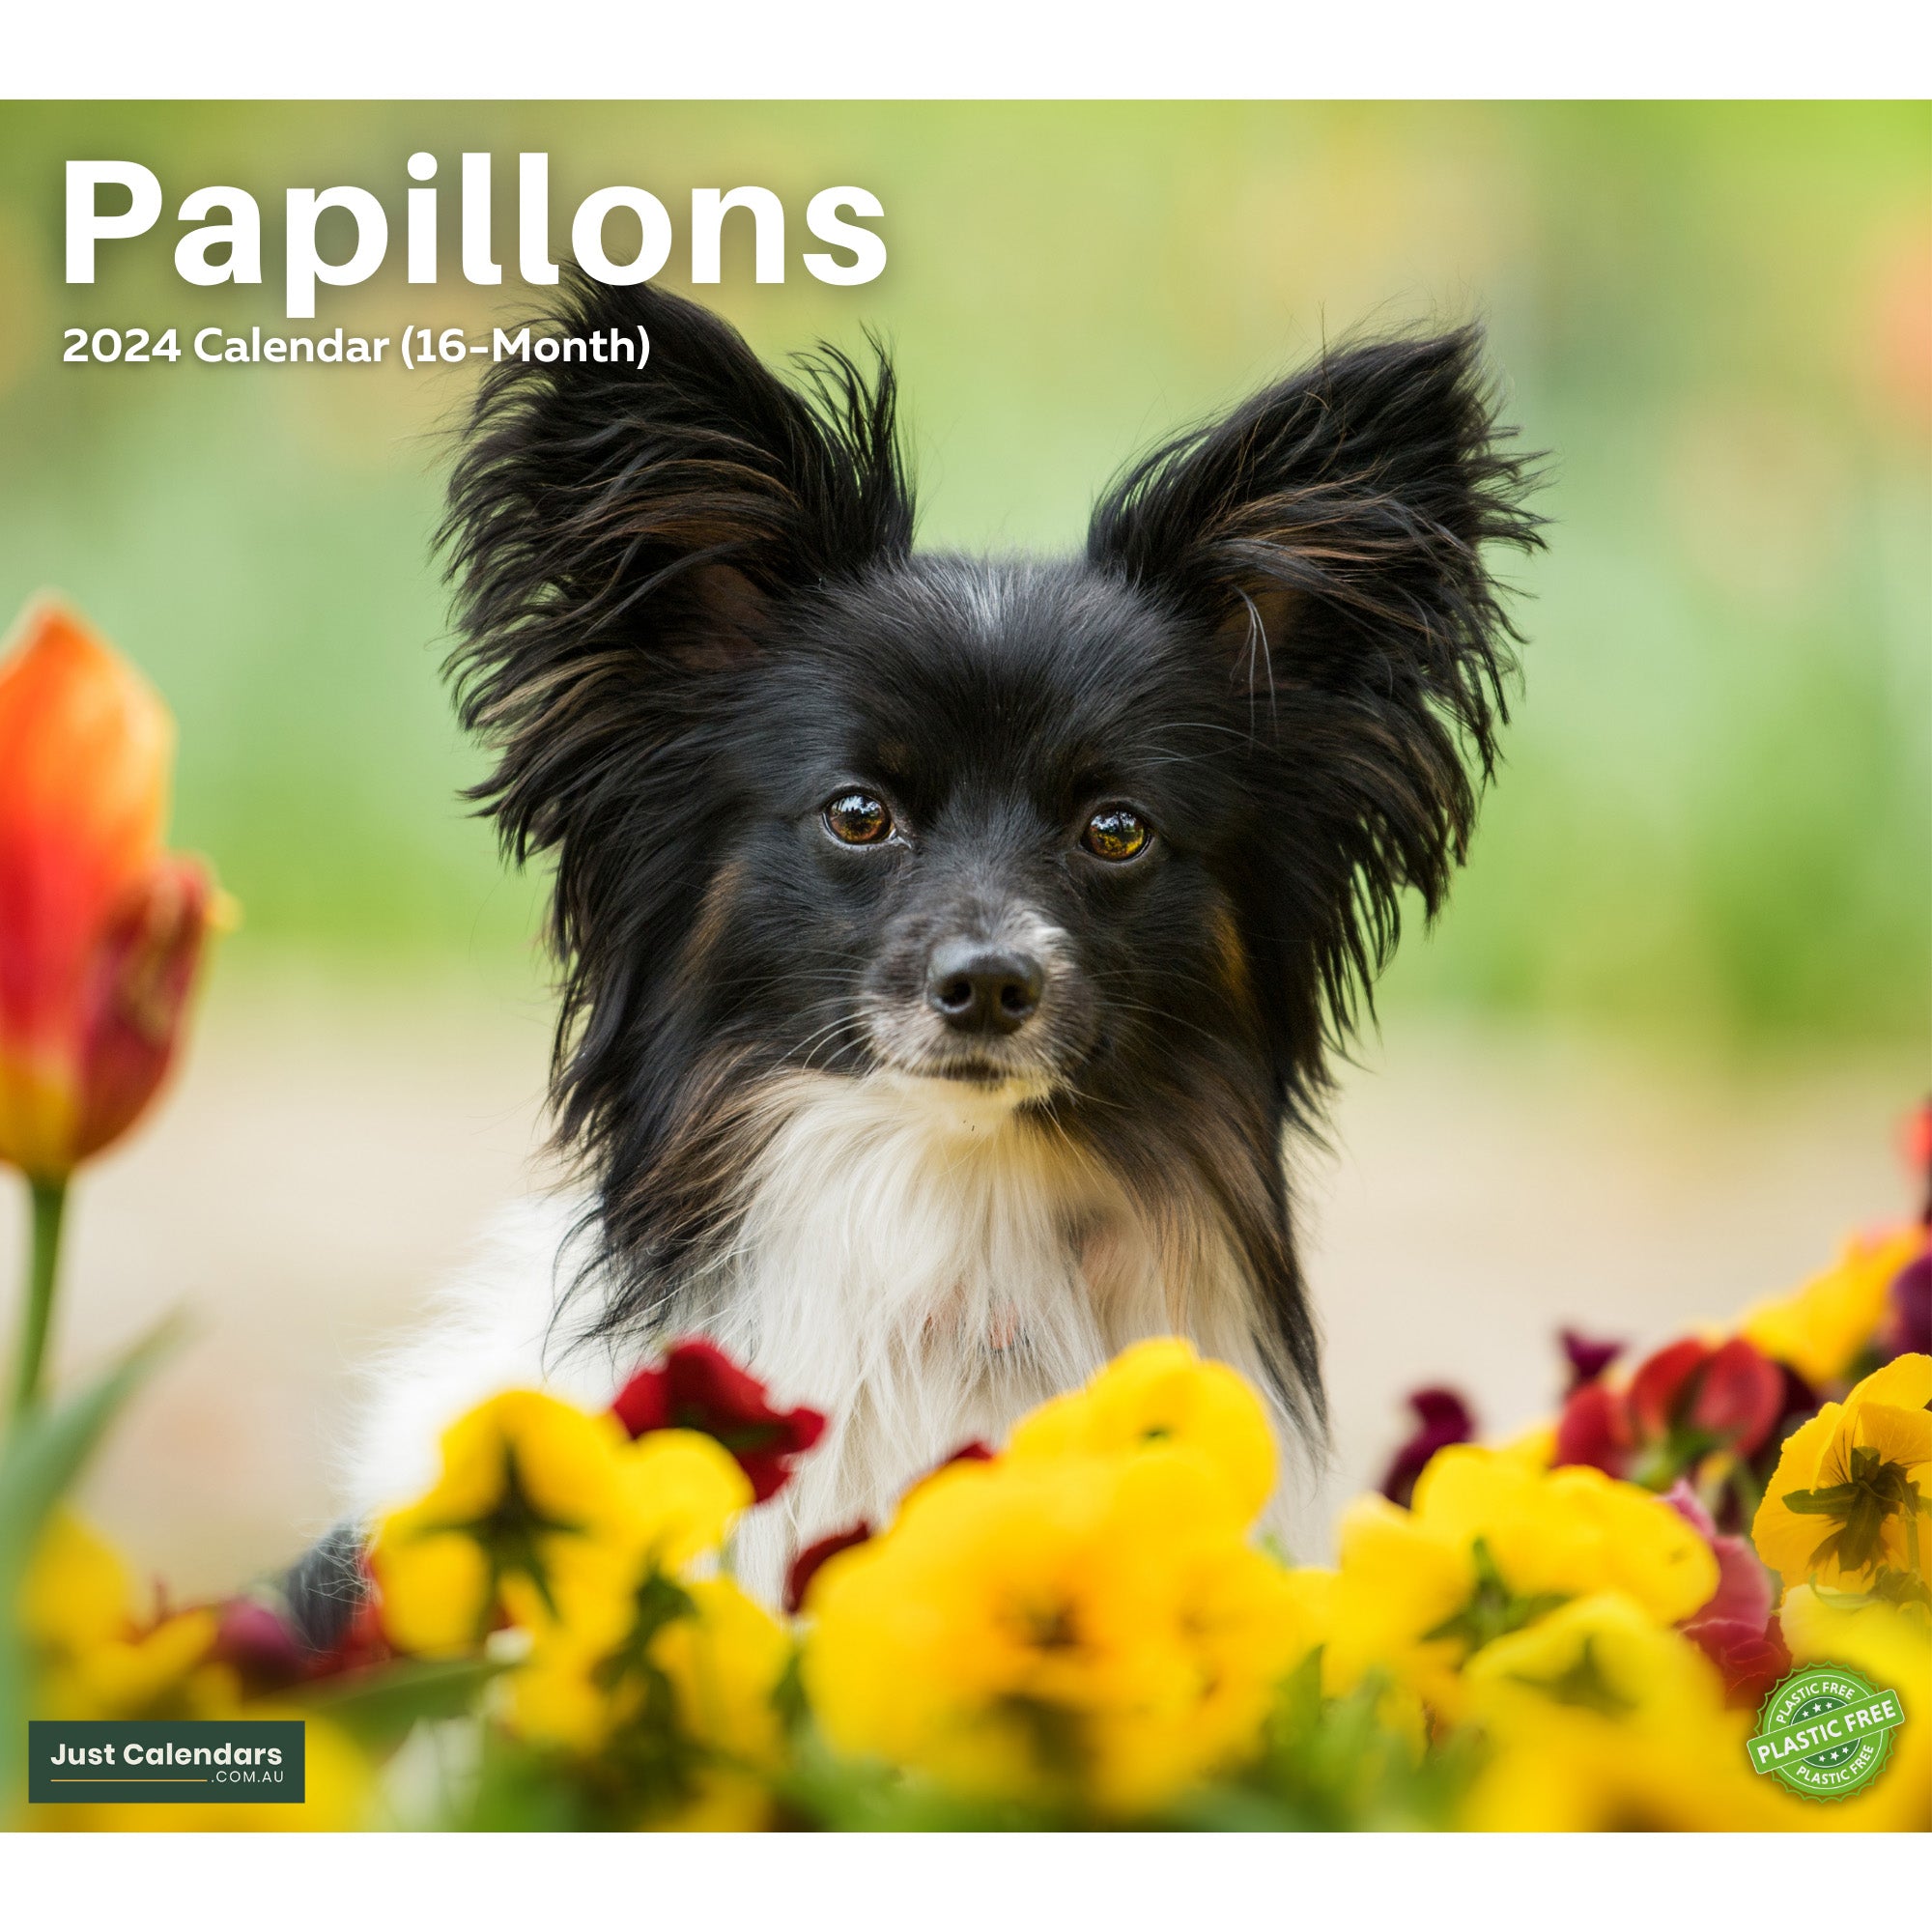 2024 Papillons Dogs & Puppies - Deluxe Wall Calendar by Just Calendars - 16 Month - Plastic Free